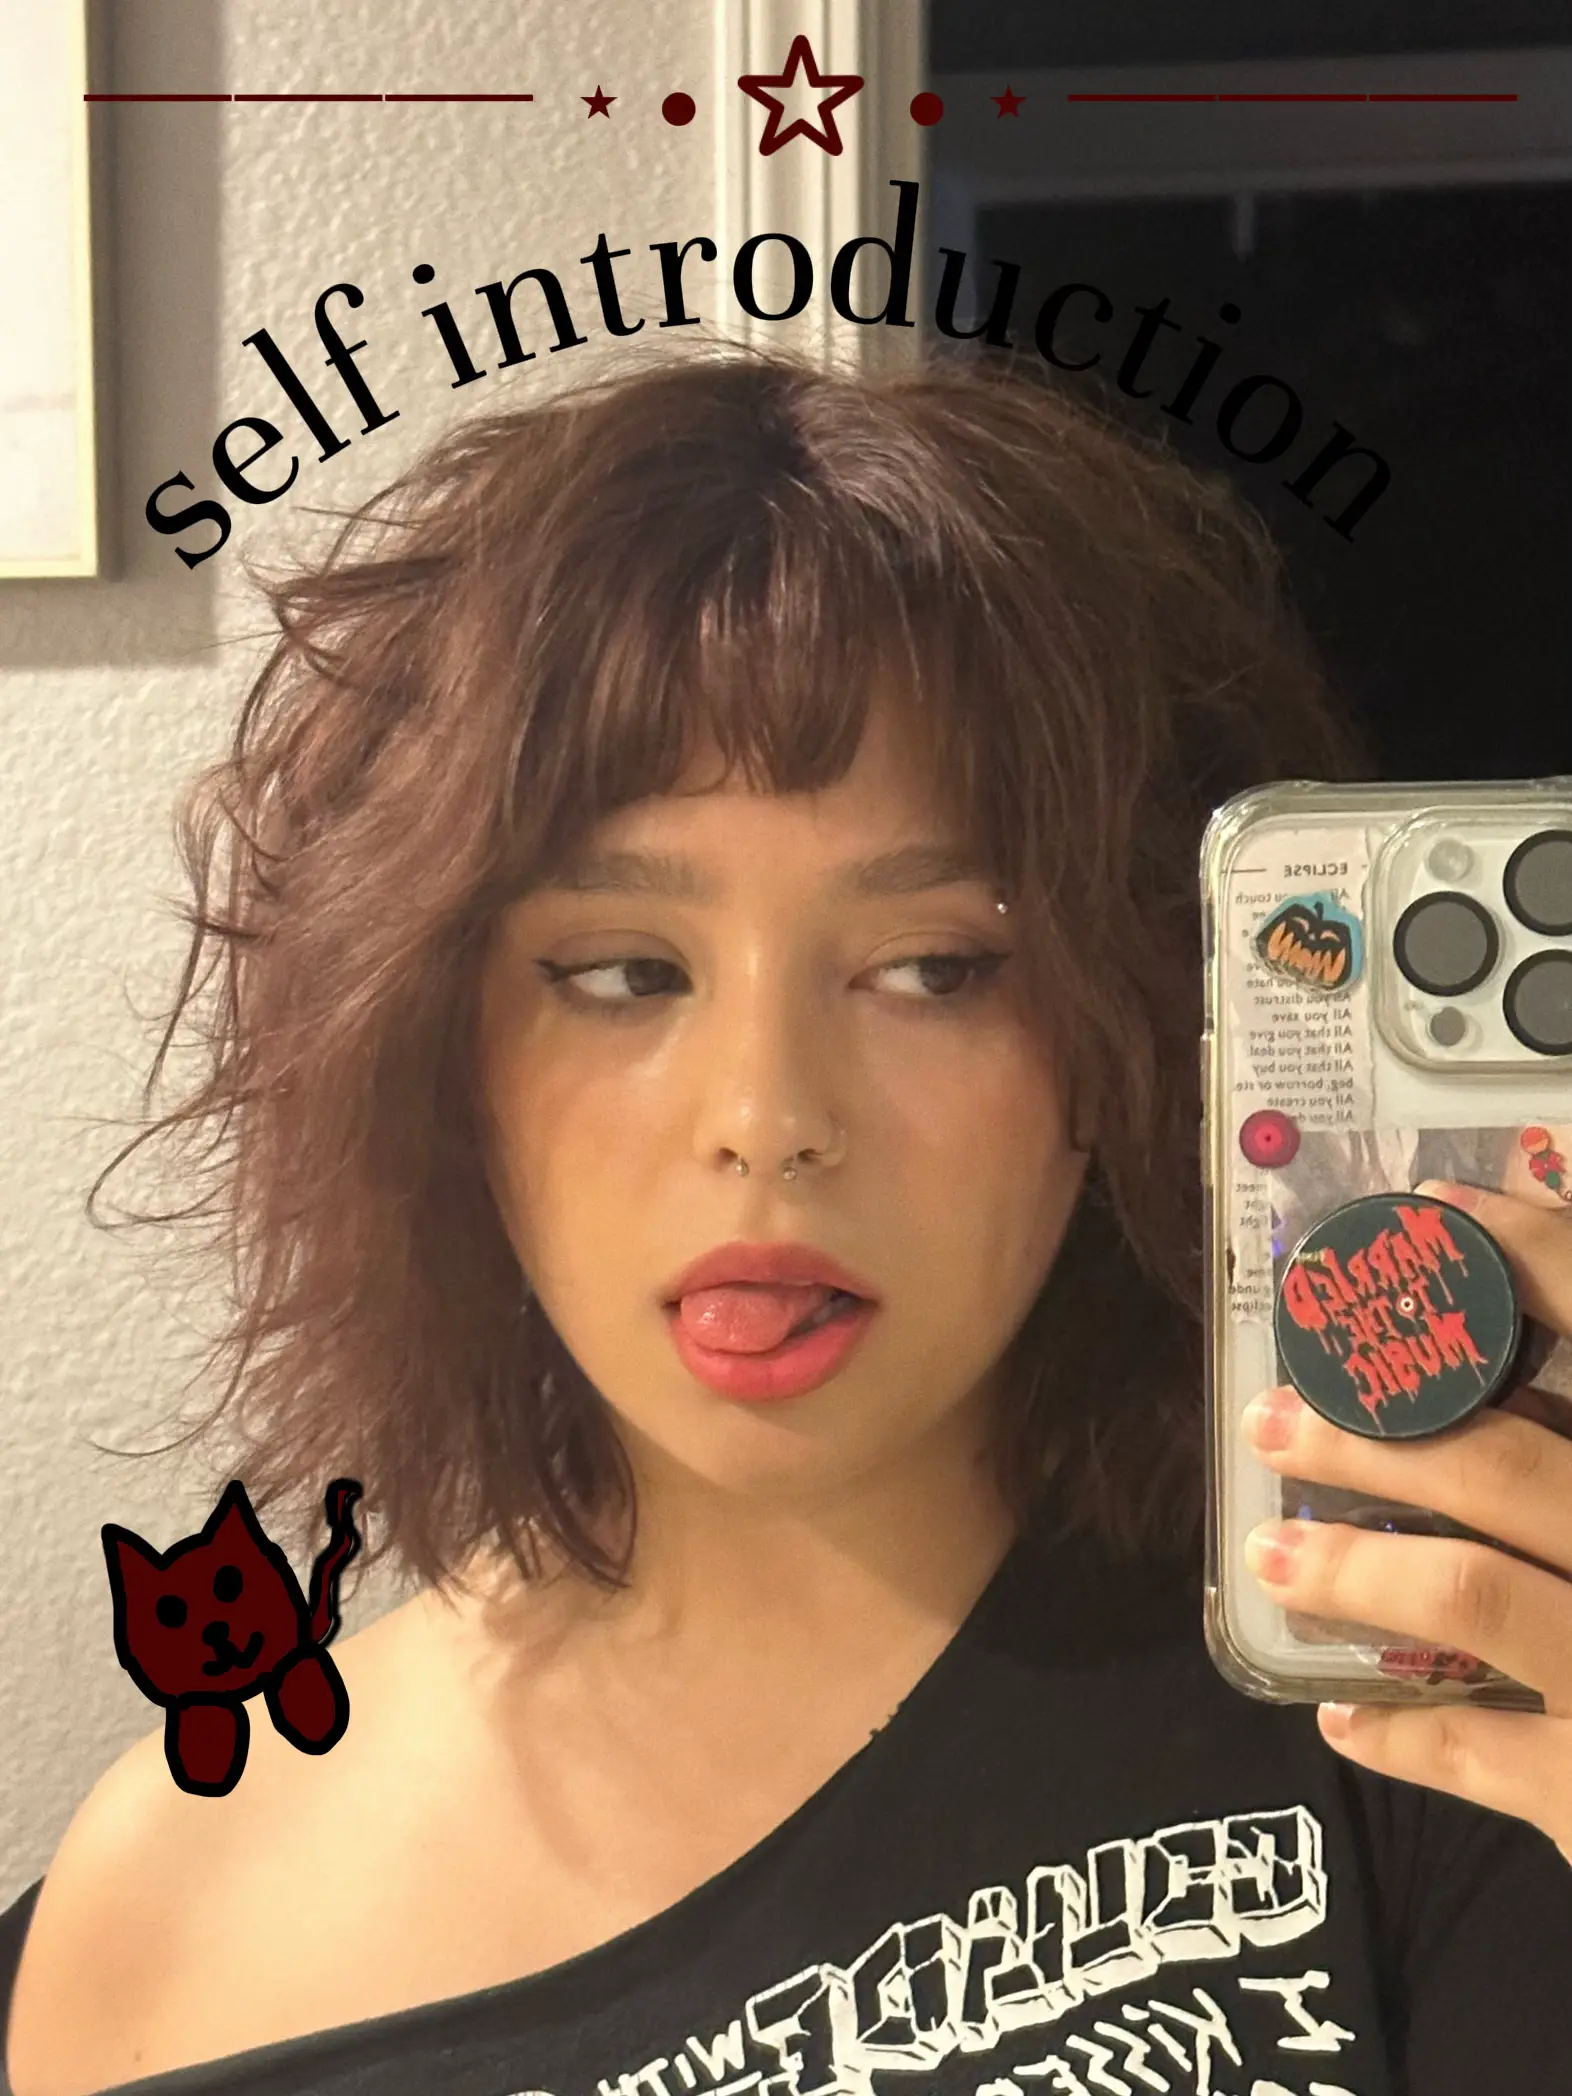 self introduction 's images